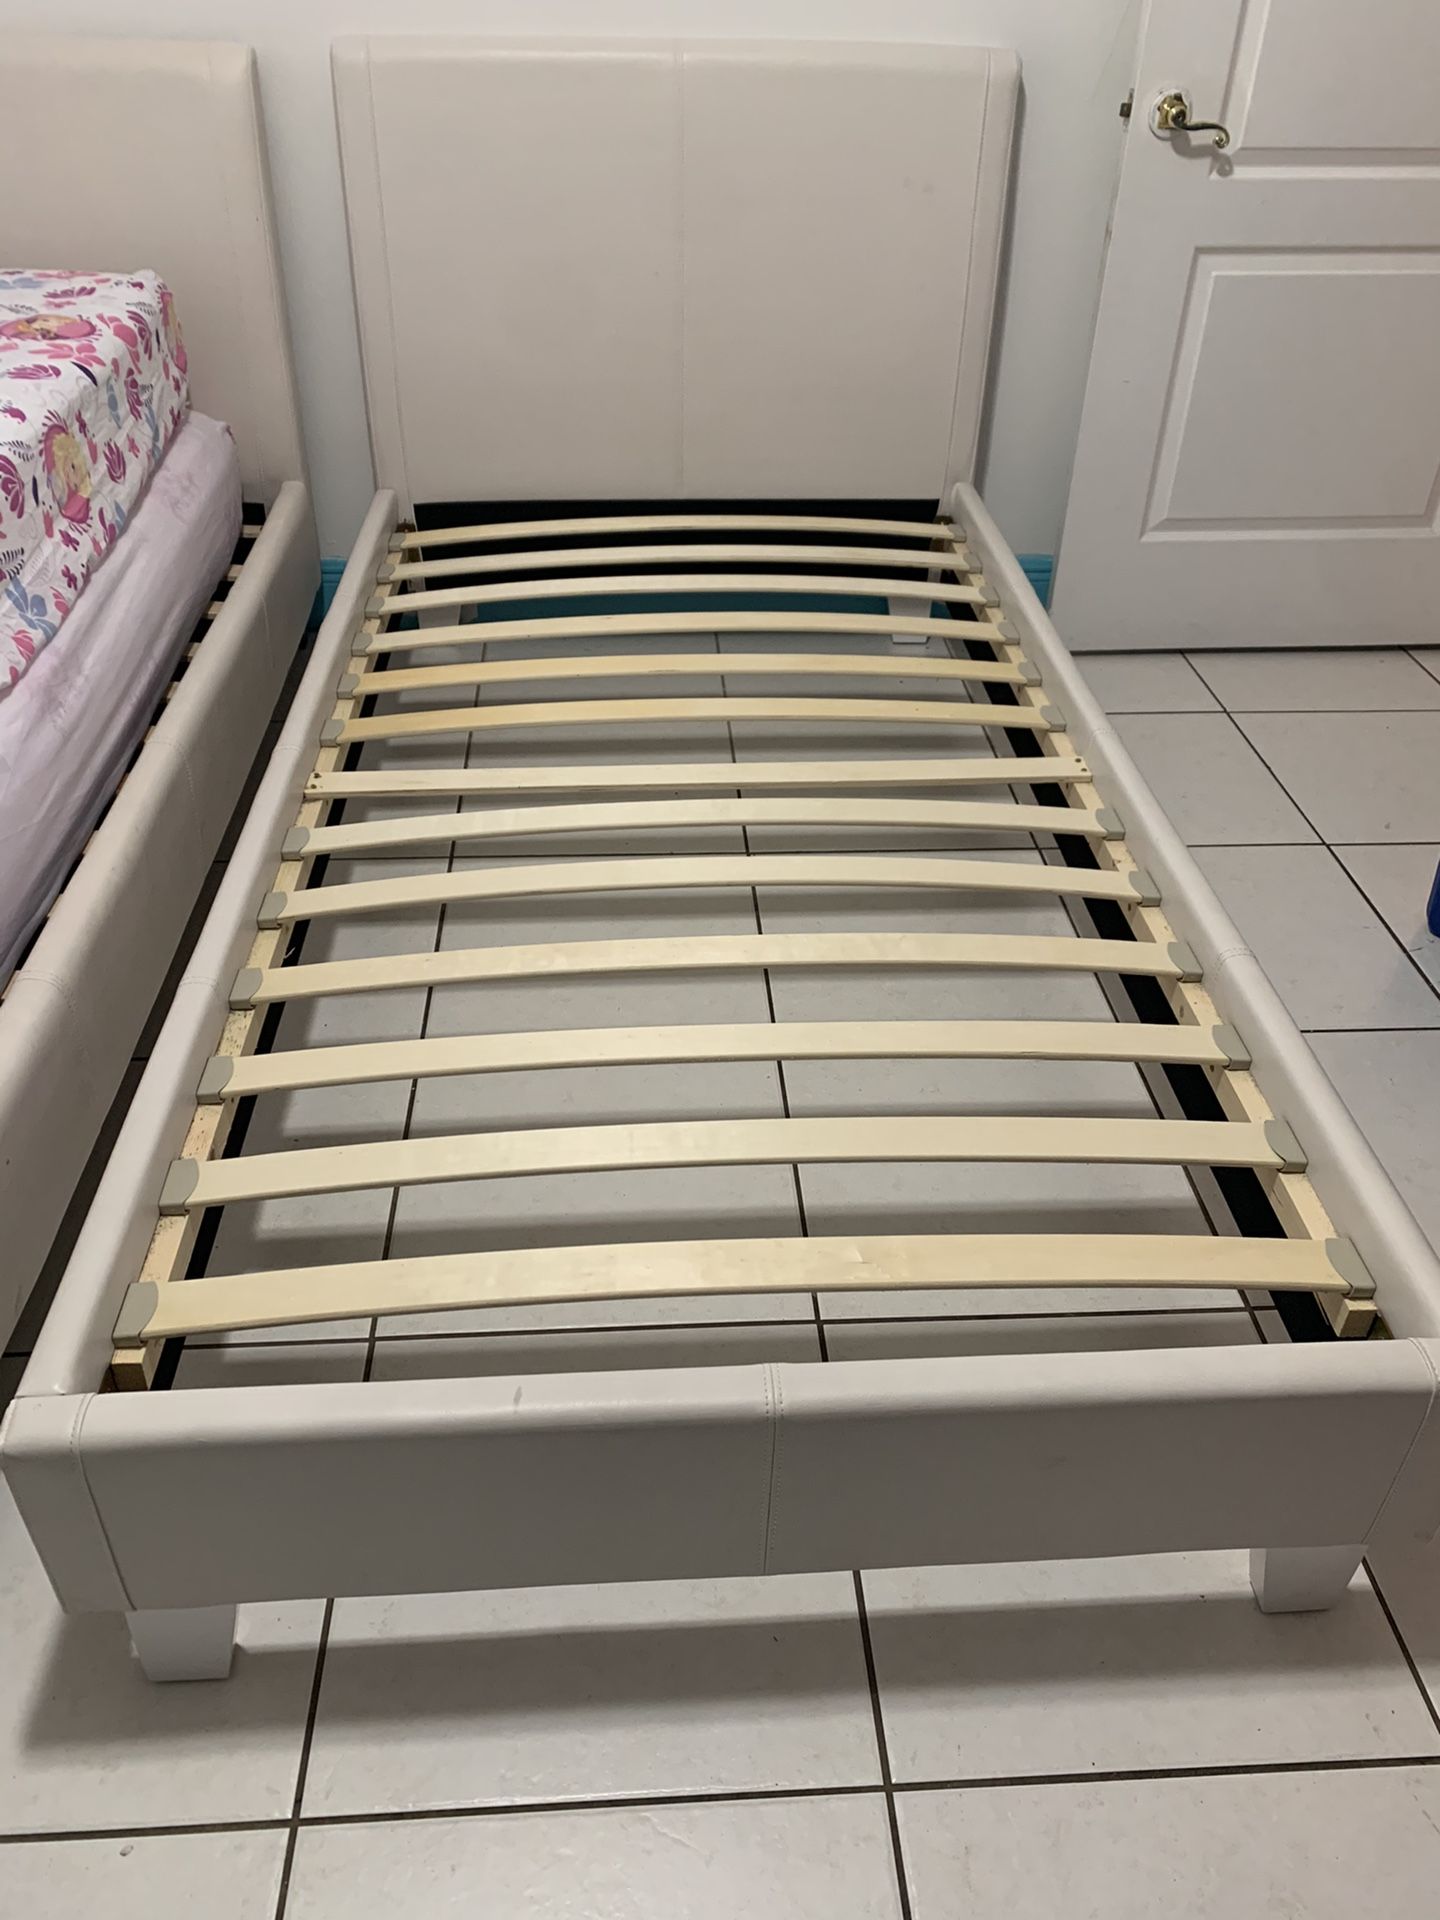 (2) twin size bed (each 150)